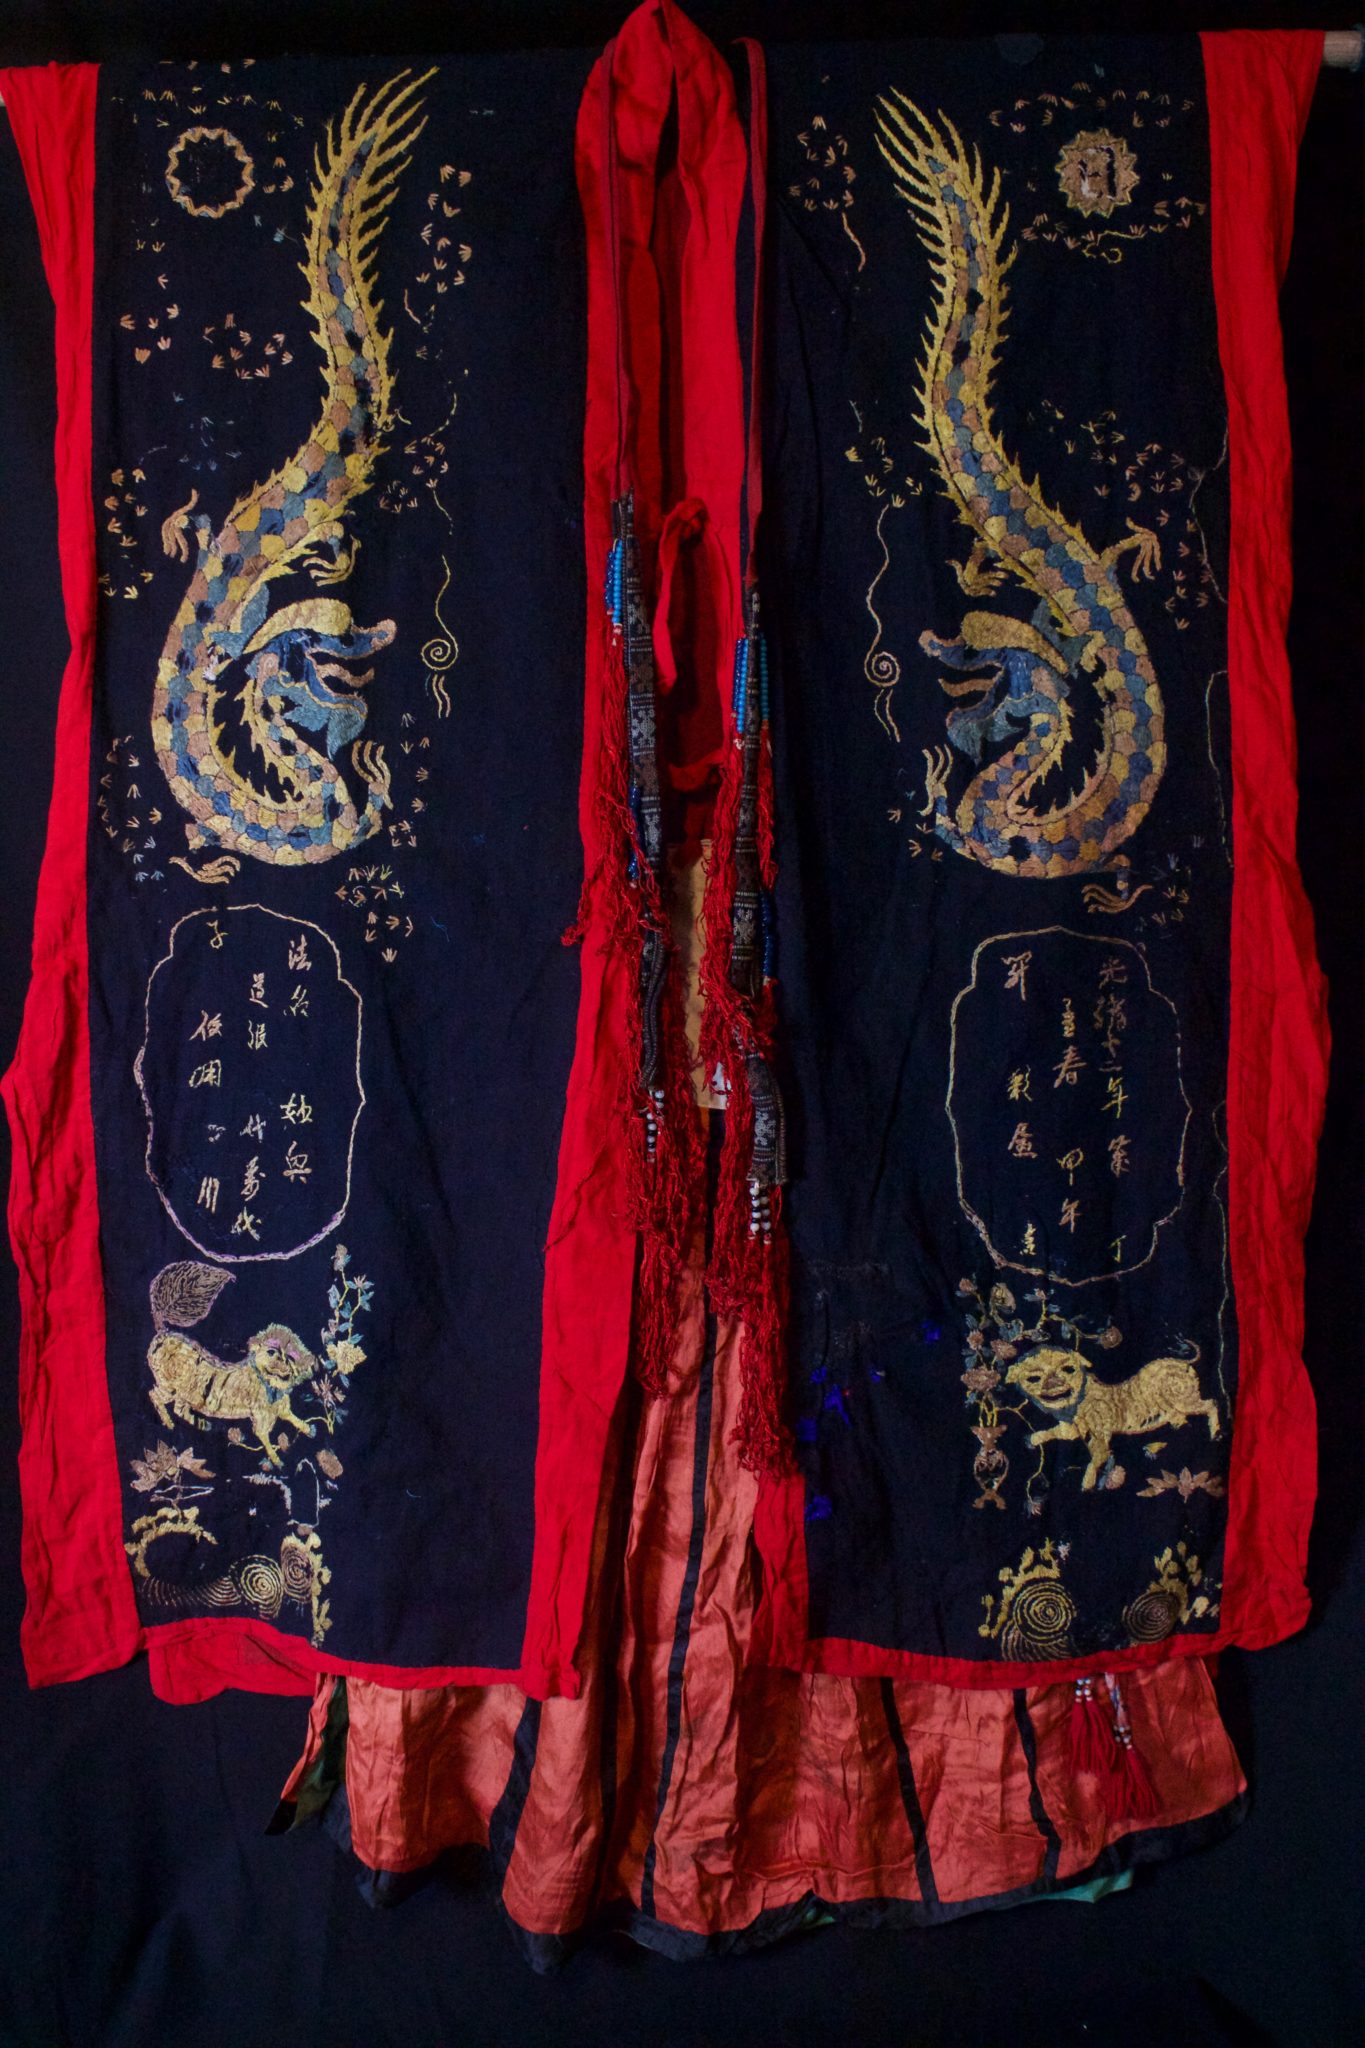 Dragon Robe (front), Shaman Priest's Costume, complete outfit; Robe, Skirt, Belt, ( Scarf see next image), Vietnam, Tao people, Mid 20th c, Cotton, silk embroidery. Worn by shaman/priests for all ceremonies. The motif typically includes all the deities of heaven to clothe the shaman in the universe for protection. Not a vain adornment, it is a reminder of man's place in the hierarchical order. Long ago shamans were women and men the providers. Not being encumbered by childbirth and child rearing, men replaced women as shaman but retained the same sacred costume. This type of headpiece/scarf is worn by postulant or newly ordained shaman. High level priests will wear a hat made of human hair. Dimensions (49” x 42” robe); (35” x 26” skirt); (106” x 3” belt); (118” x 9 ½” scarf), $3900 full costume